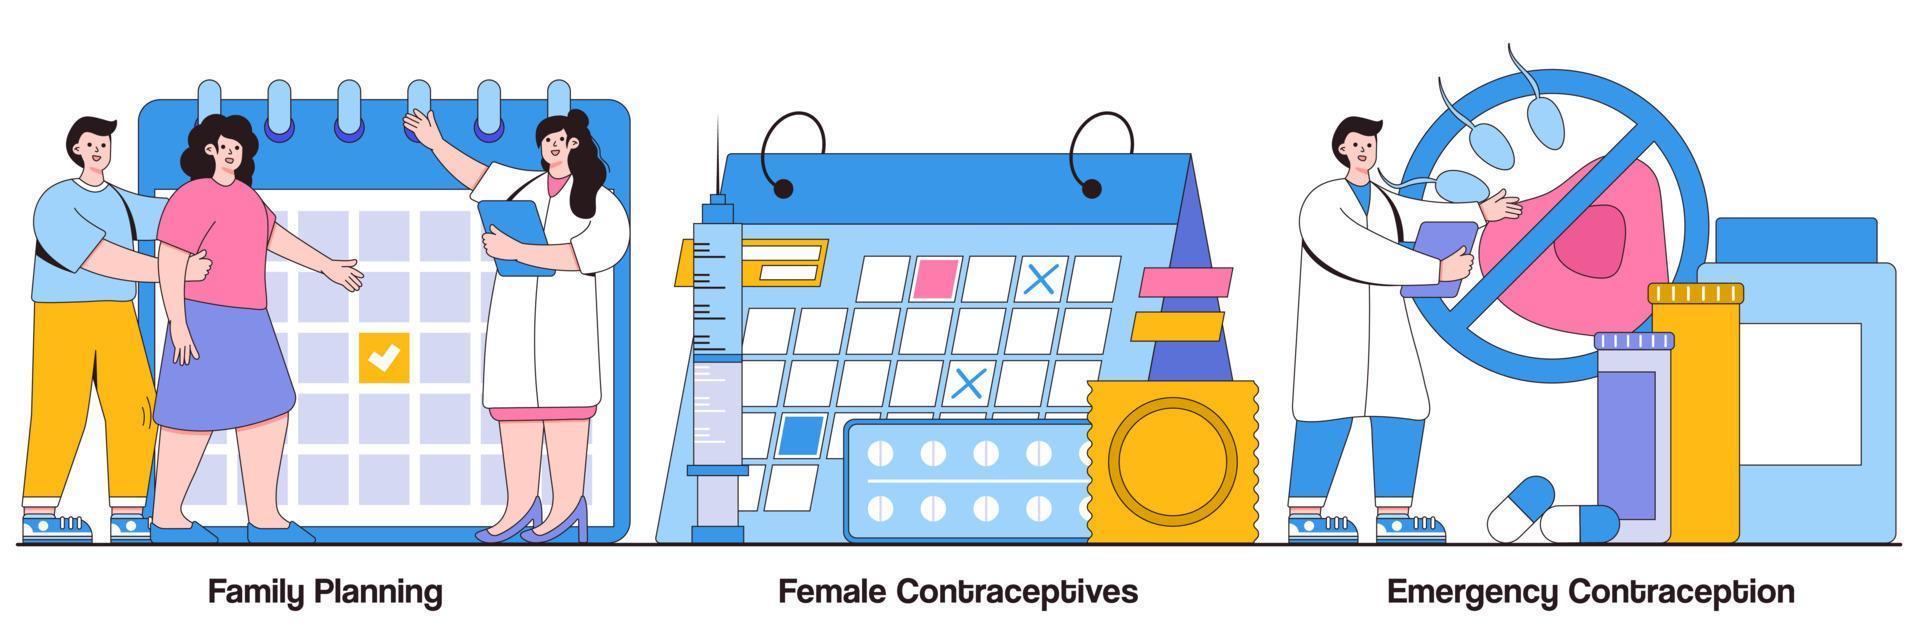 Family Planning, Female Contraceptives, Emergency Contraception with People Characters Illustrations Pack vector